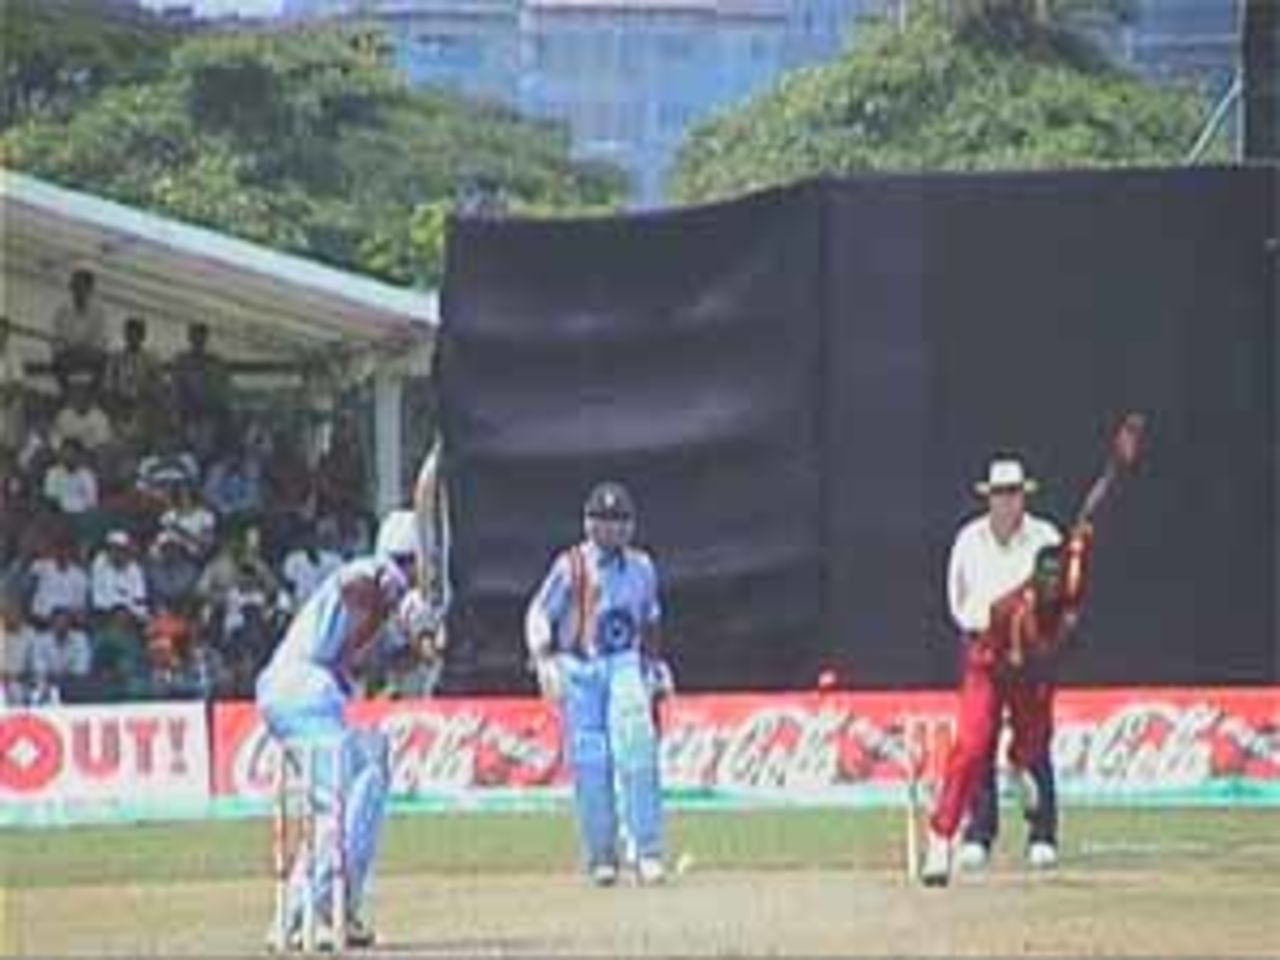 Chopra makes the best of the opportunity given to him, India v West Indies (Final), Coca-Cola Singapore Challenge, 1999-2000, Kallang Ground, Singapore, 7 Sep 1999.